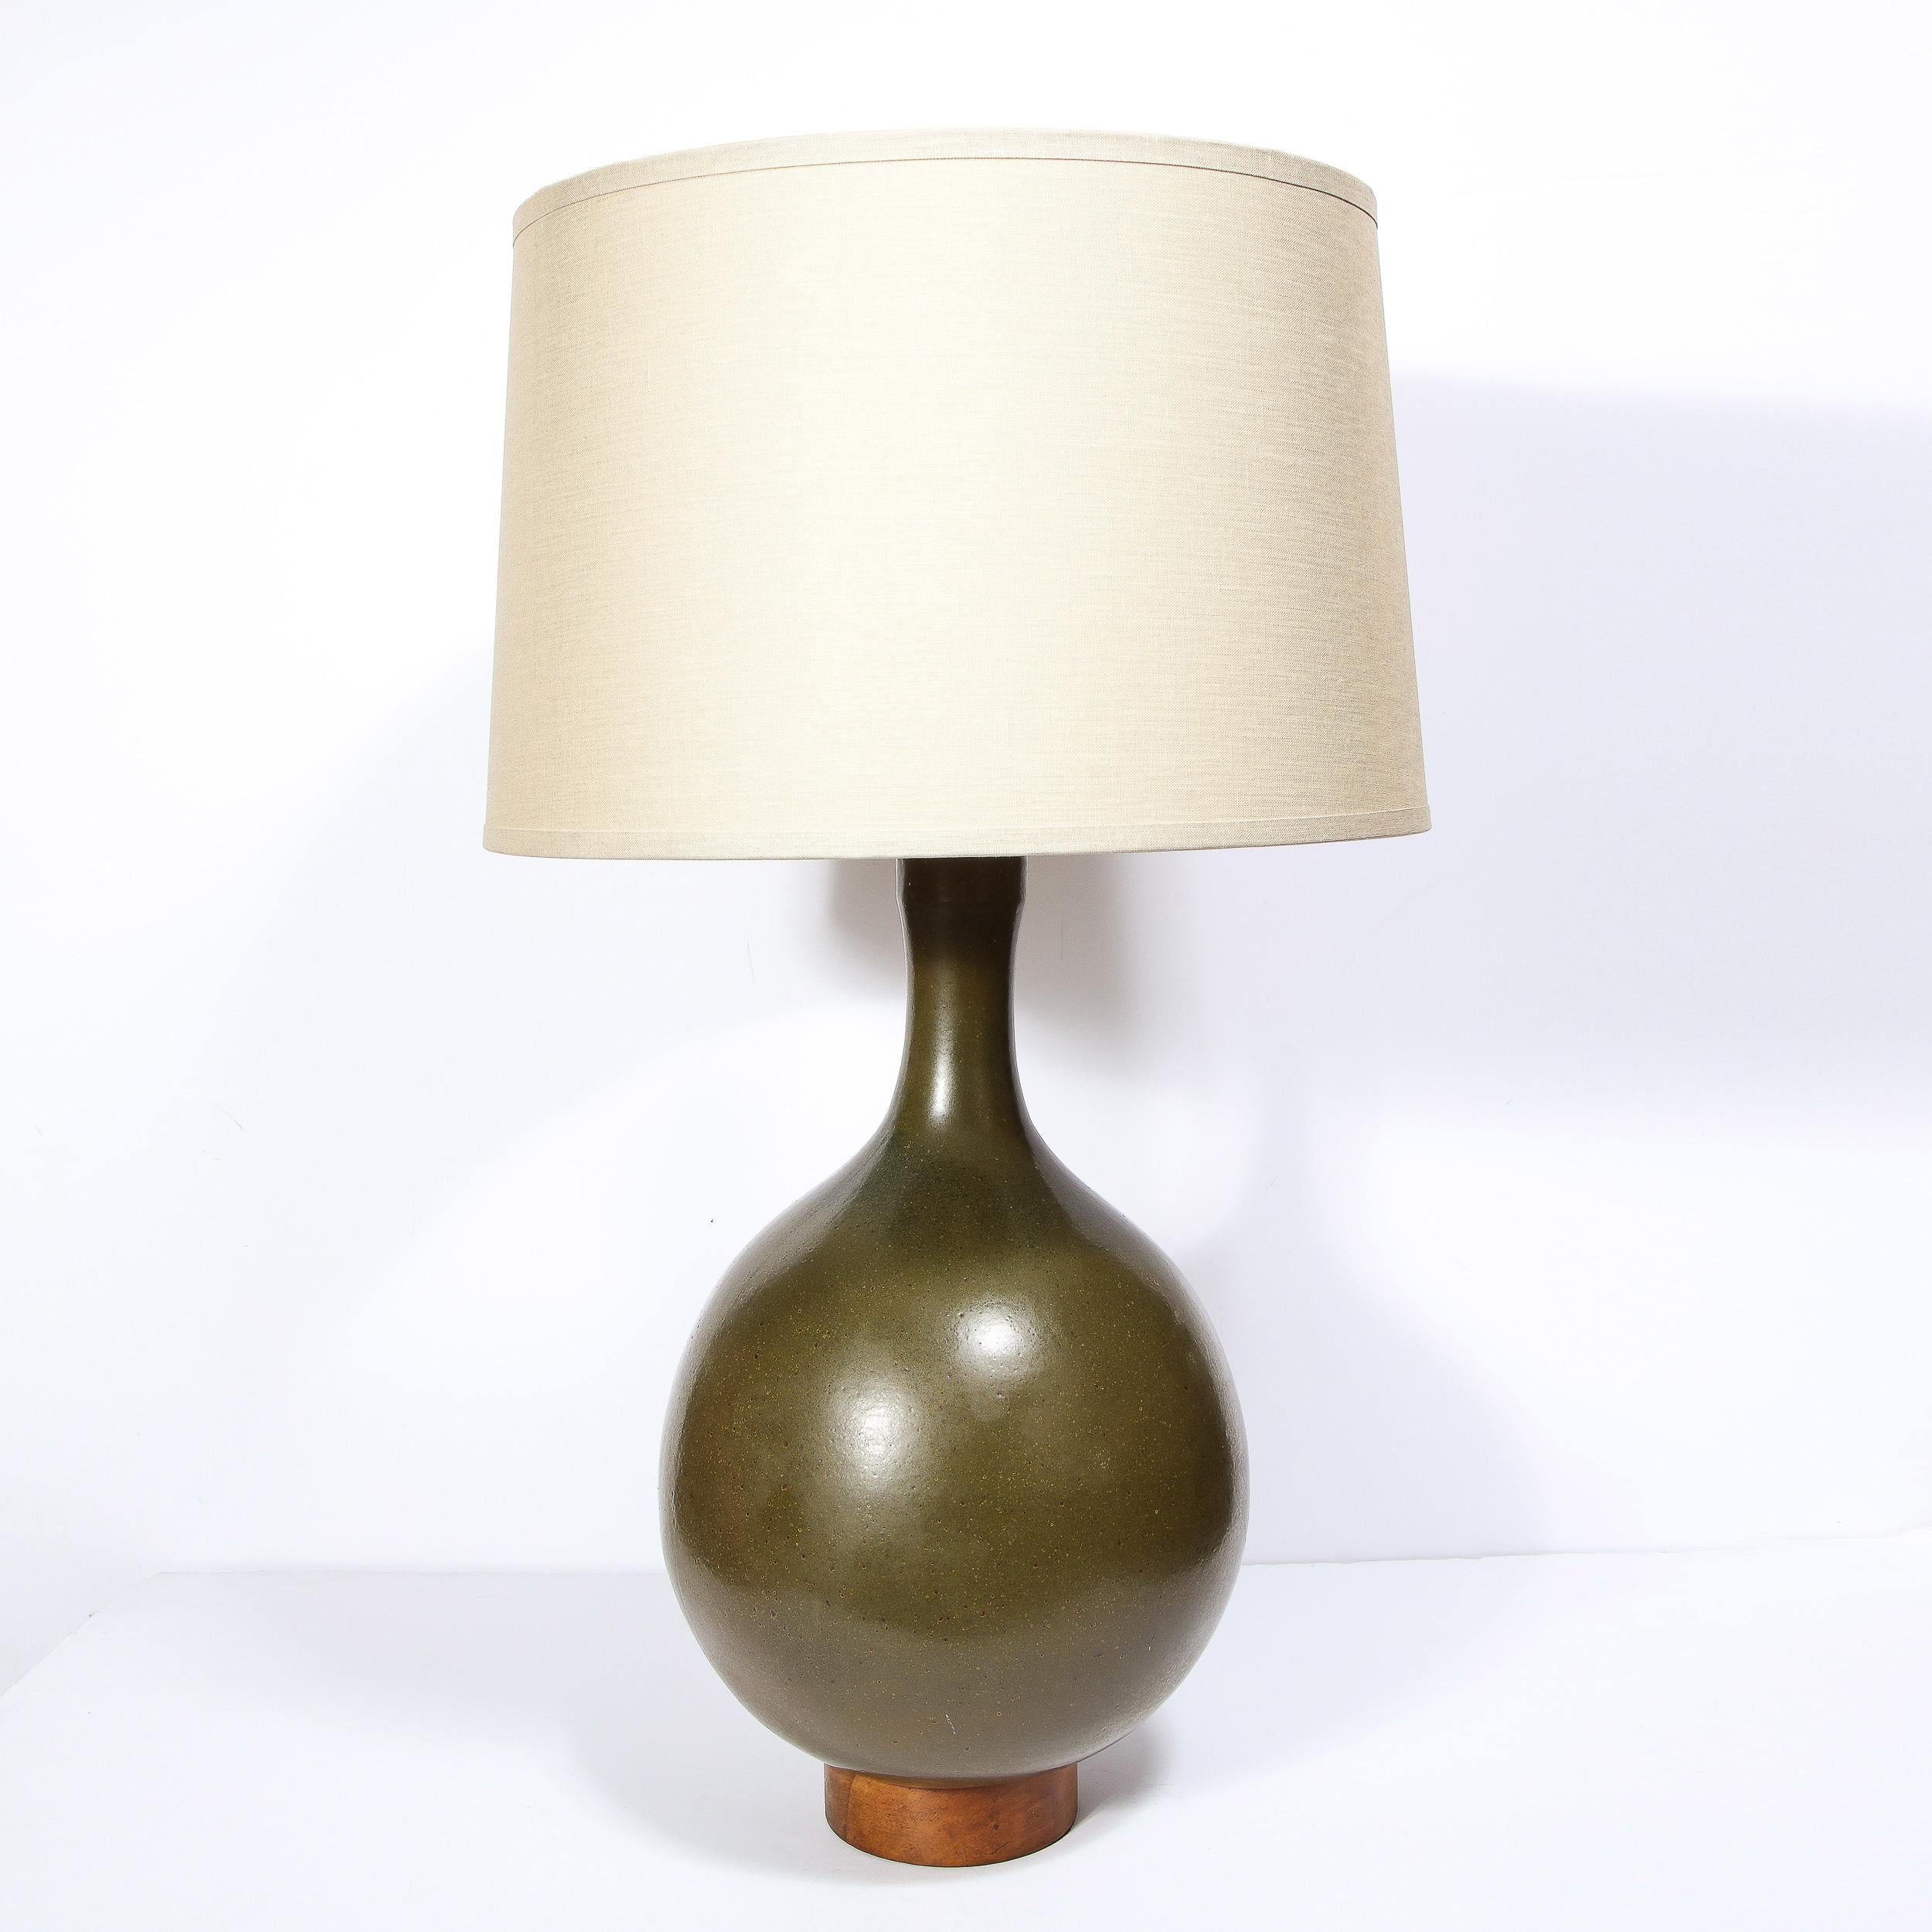 This strikingly beautiful ceramic table lamp was created by David Cressey in California, c 1960s. This wheel thrown voluminous lamp features a earthy mossy green colored glaze with a walnut rounded base in a warm brown tone. The newly rewired lamp